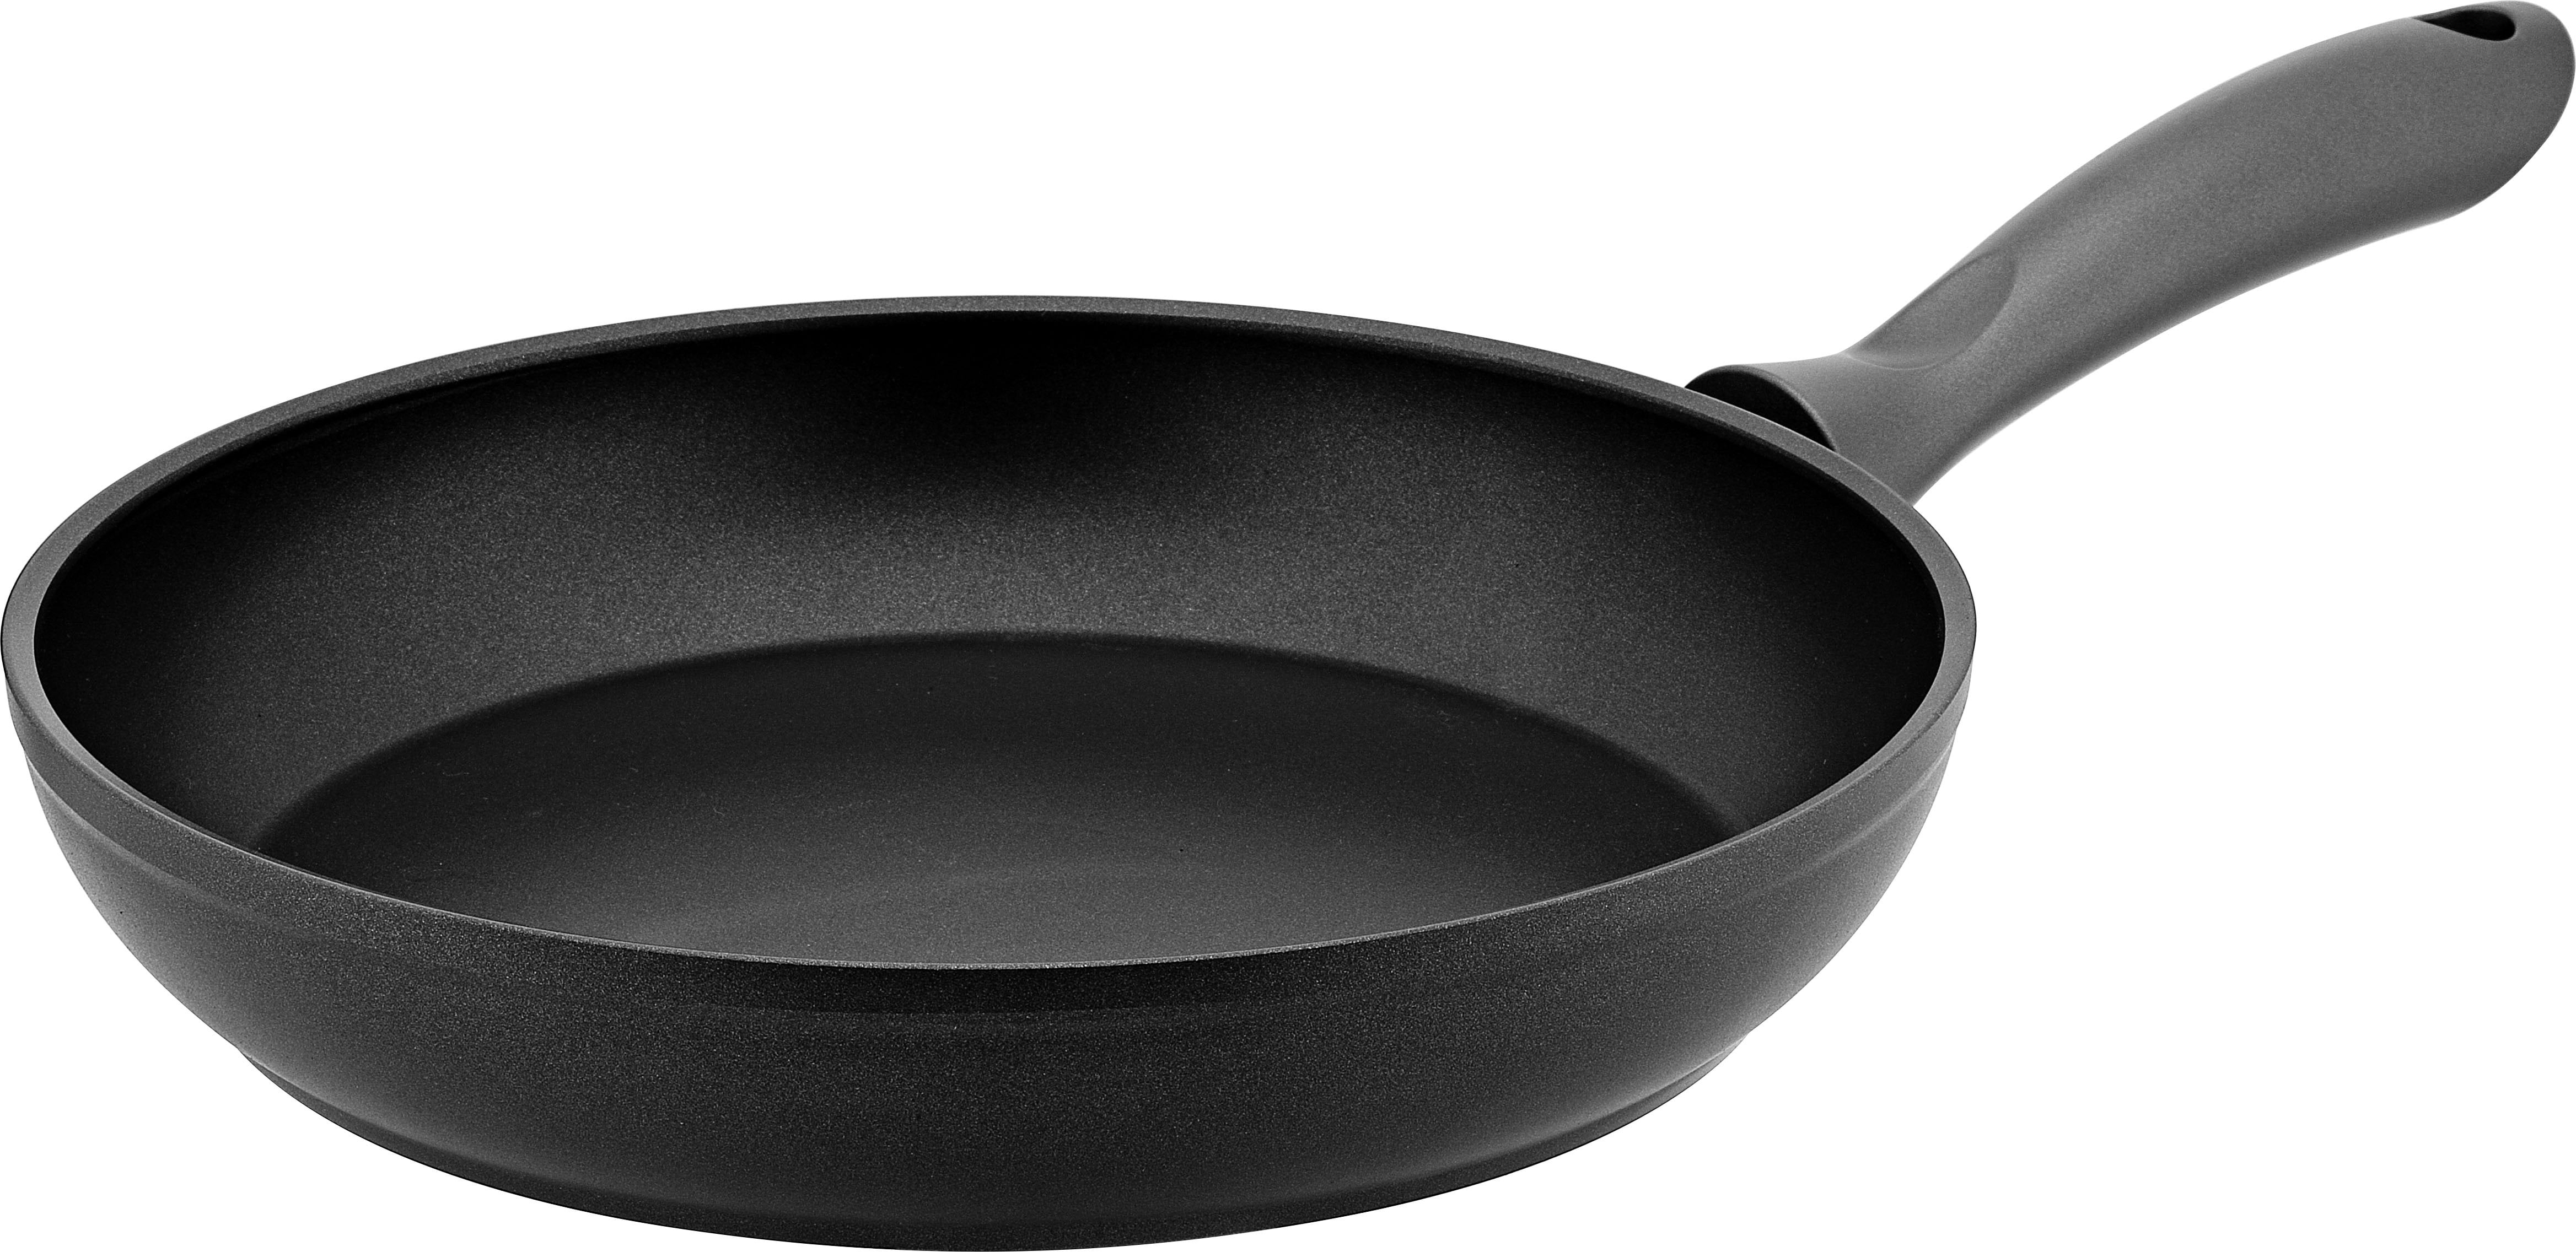 Hascevher 10 Inch Non Stick Frying Simmering Sauteing Pan Skillet Black hfg10 